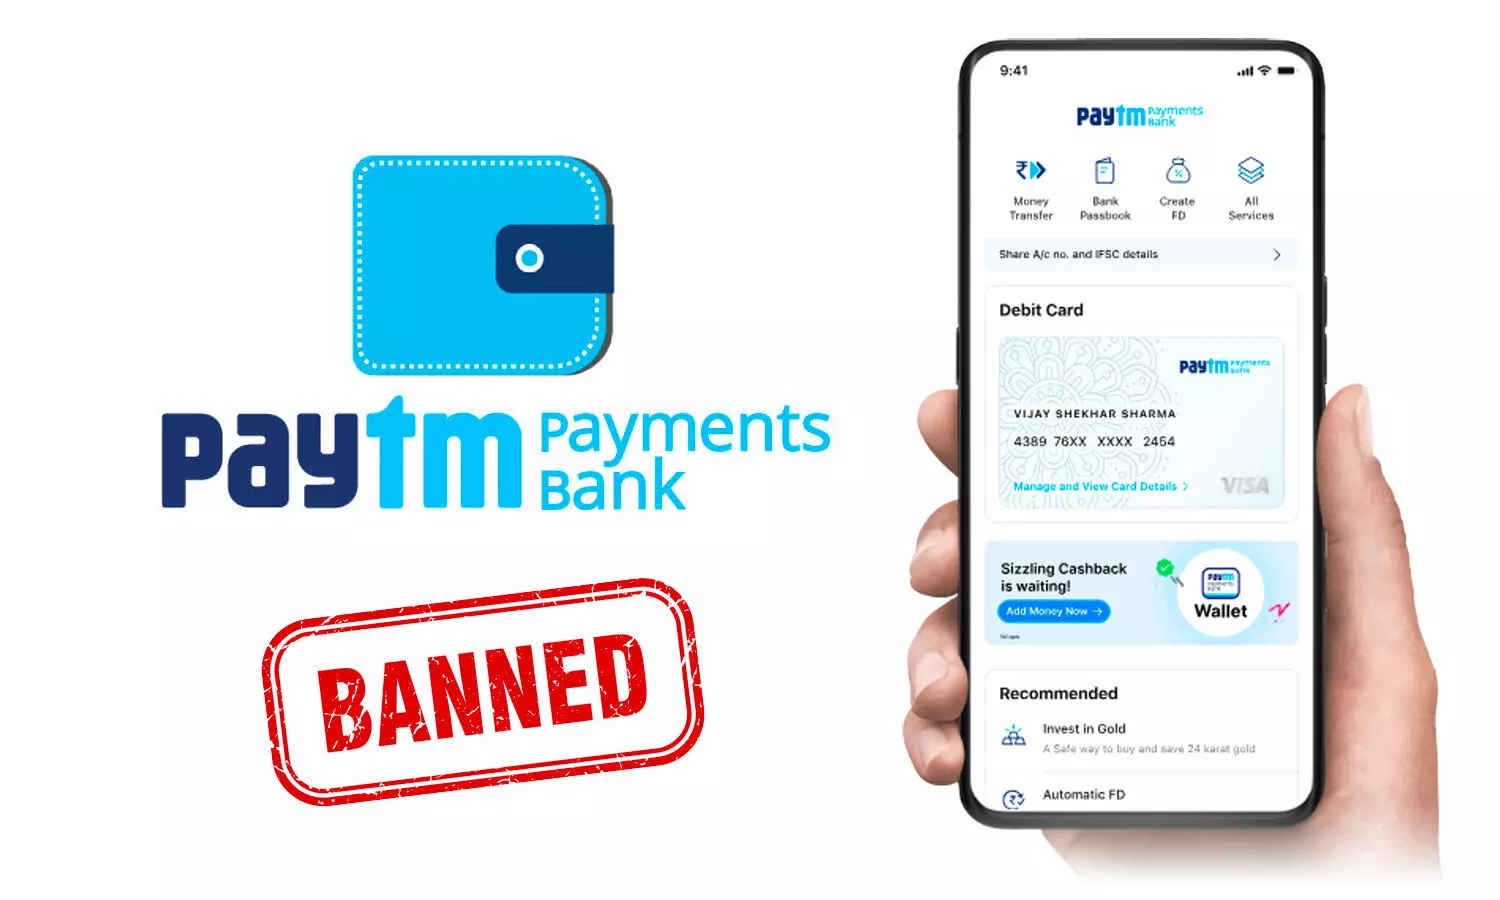 RBI bans Paytm Payments Bank amid money laundering concerns, future insecure